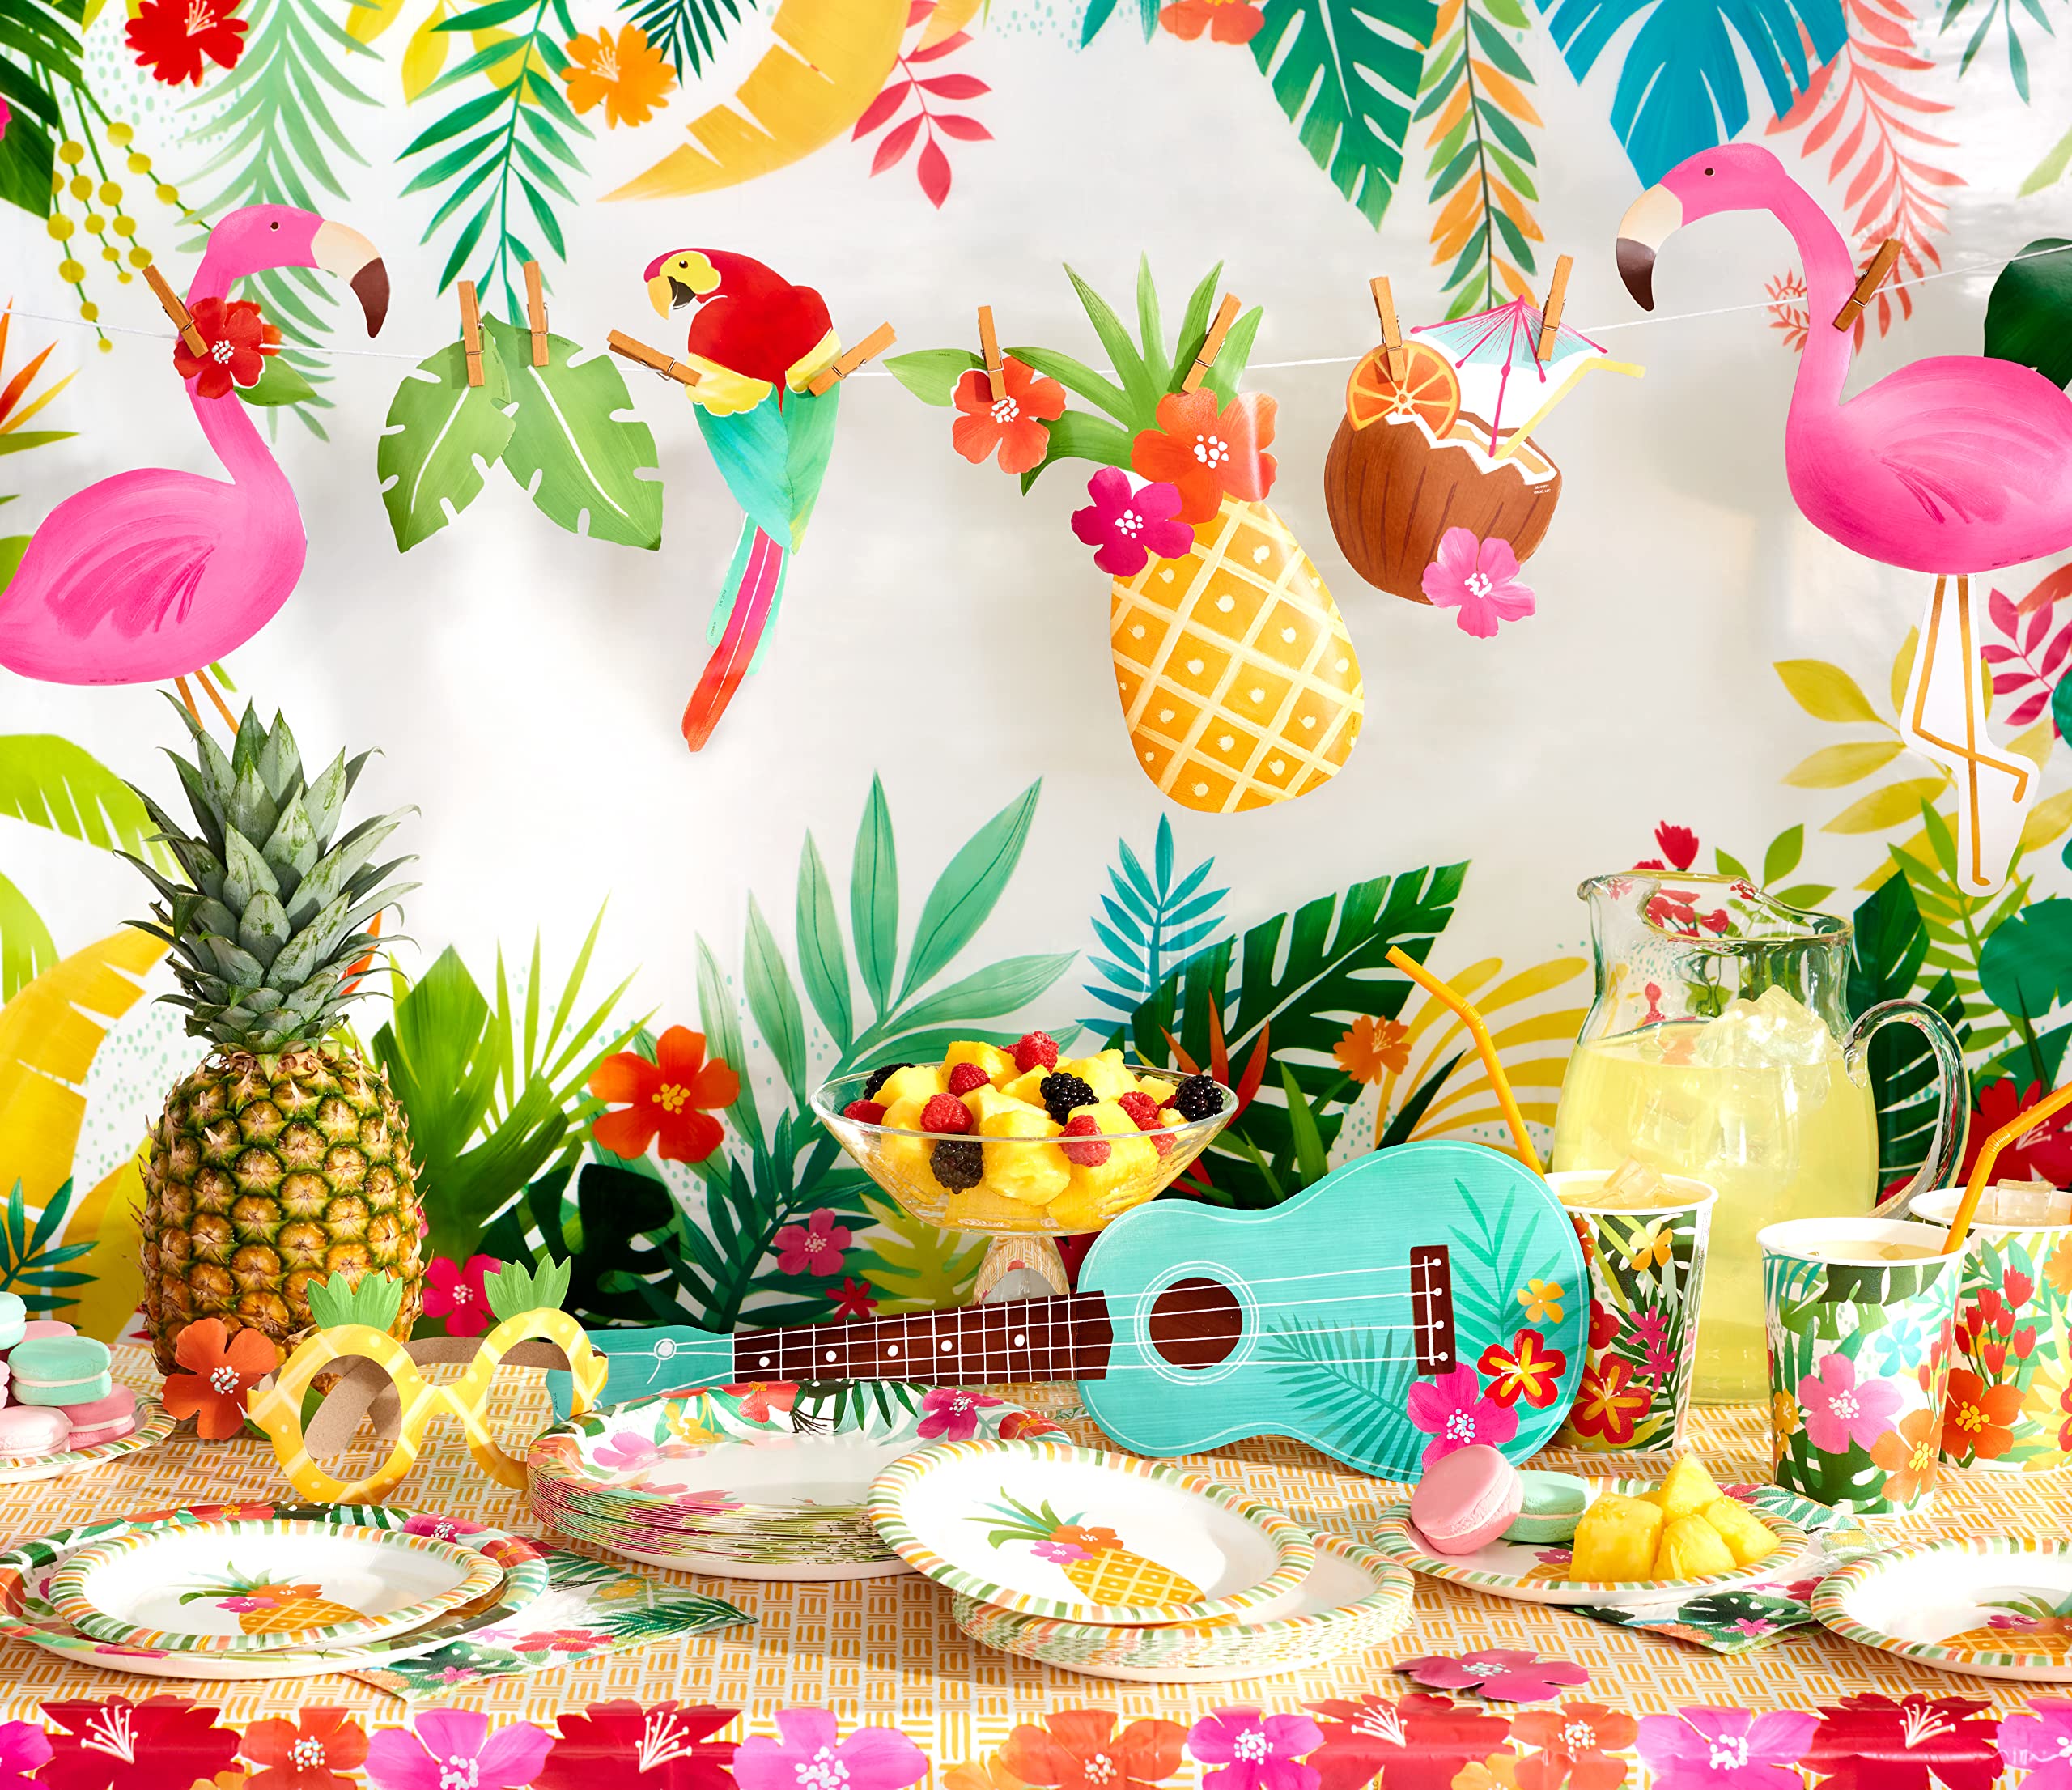 American Greetings Tropical Luau Party Supplies for BBQs and All Summer Parties, Photo Booth Props and Backdrop (22-Pieces)